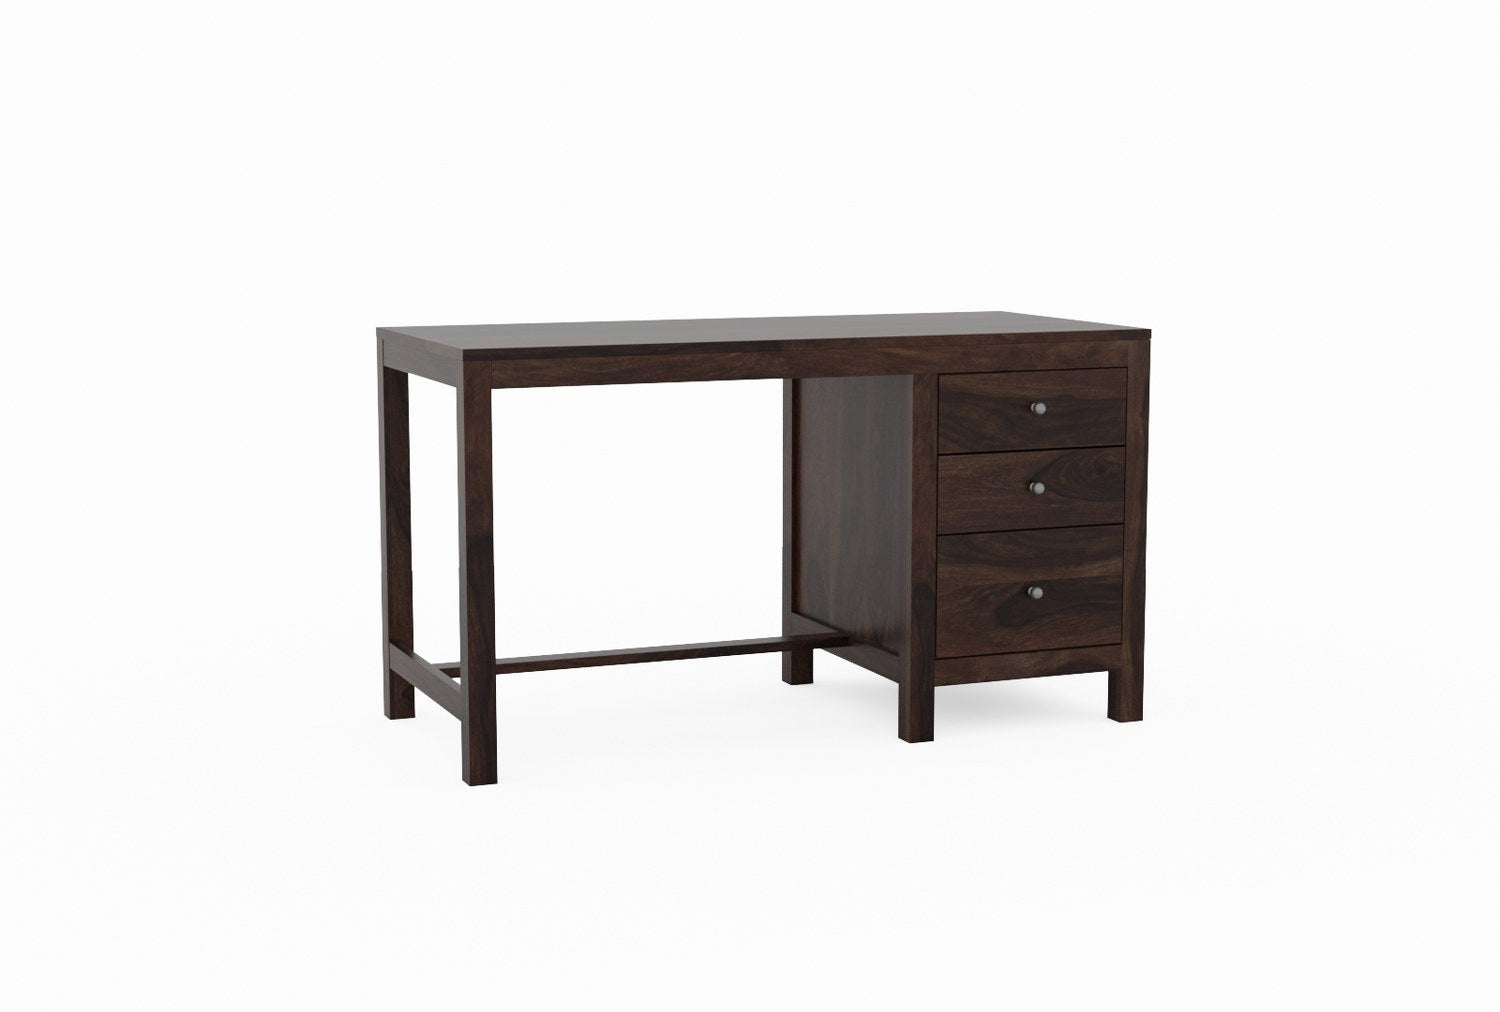 Woodwing Solid Sheesham Wood Study Table With 3 Drawers (Walnut Finish)